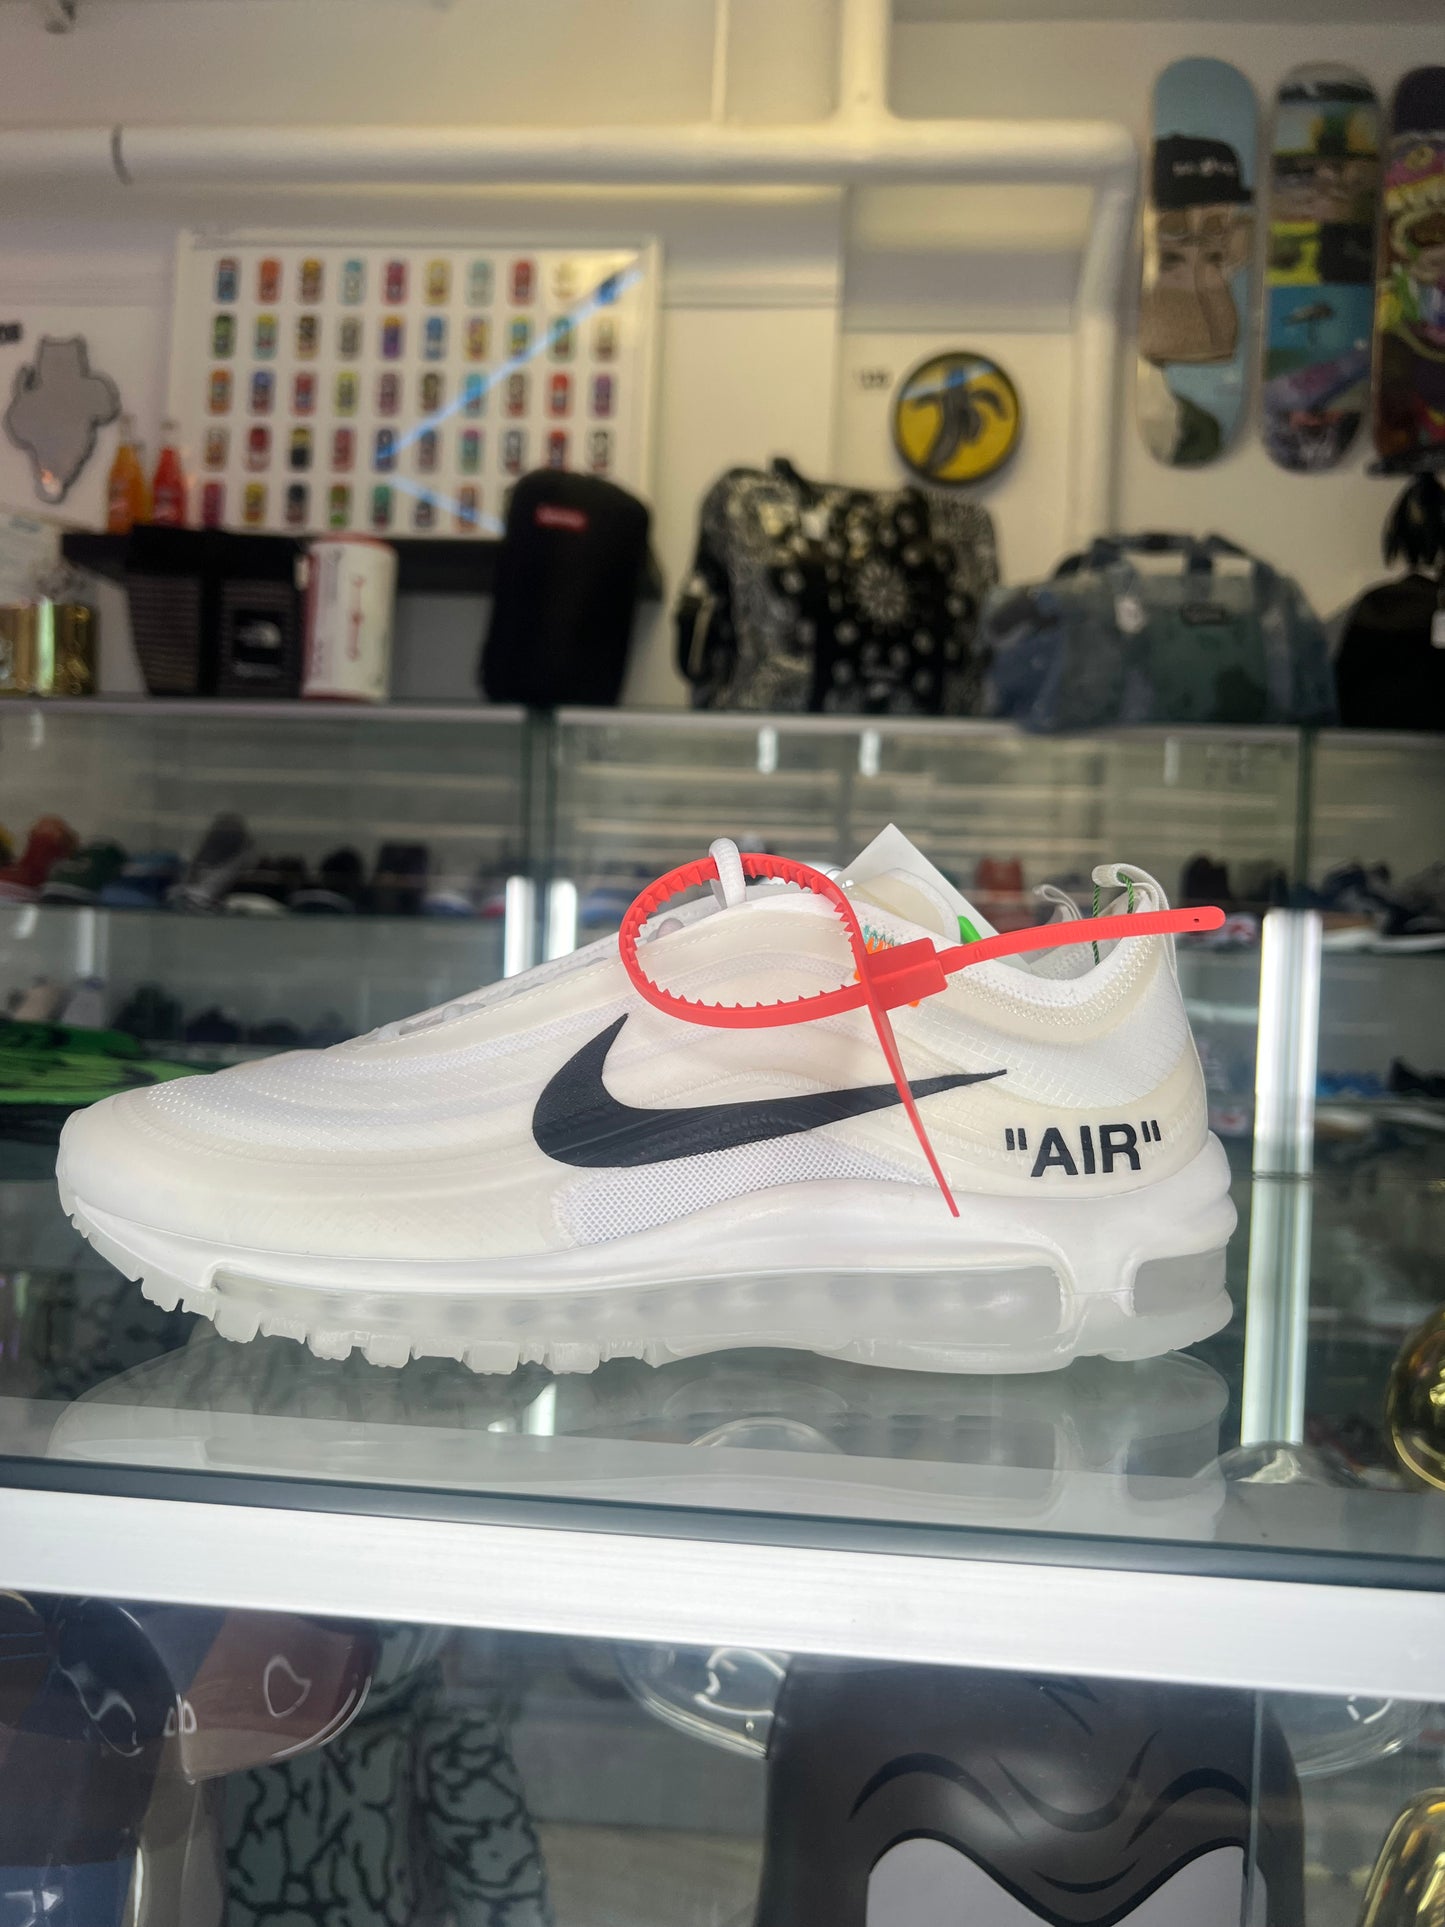 Nike Air Max 97 OFF-WHite size 8